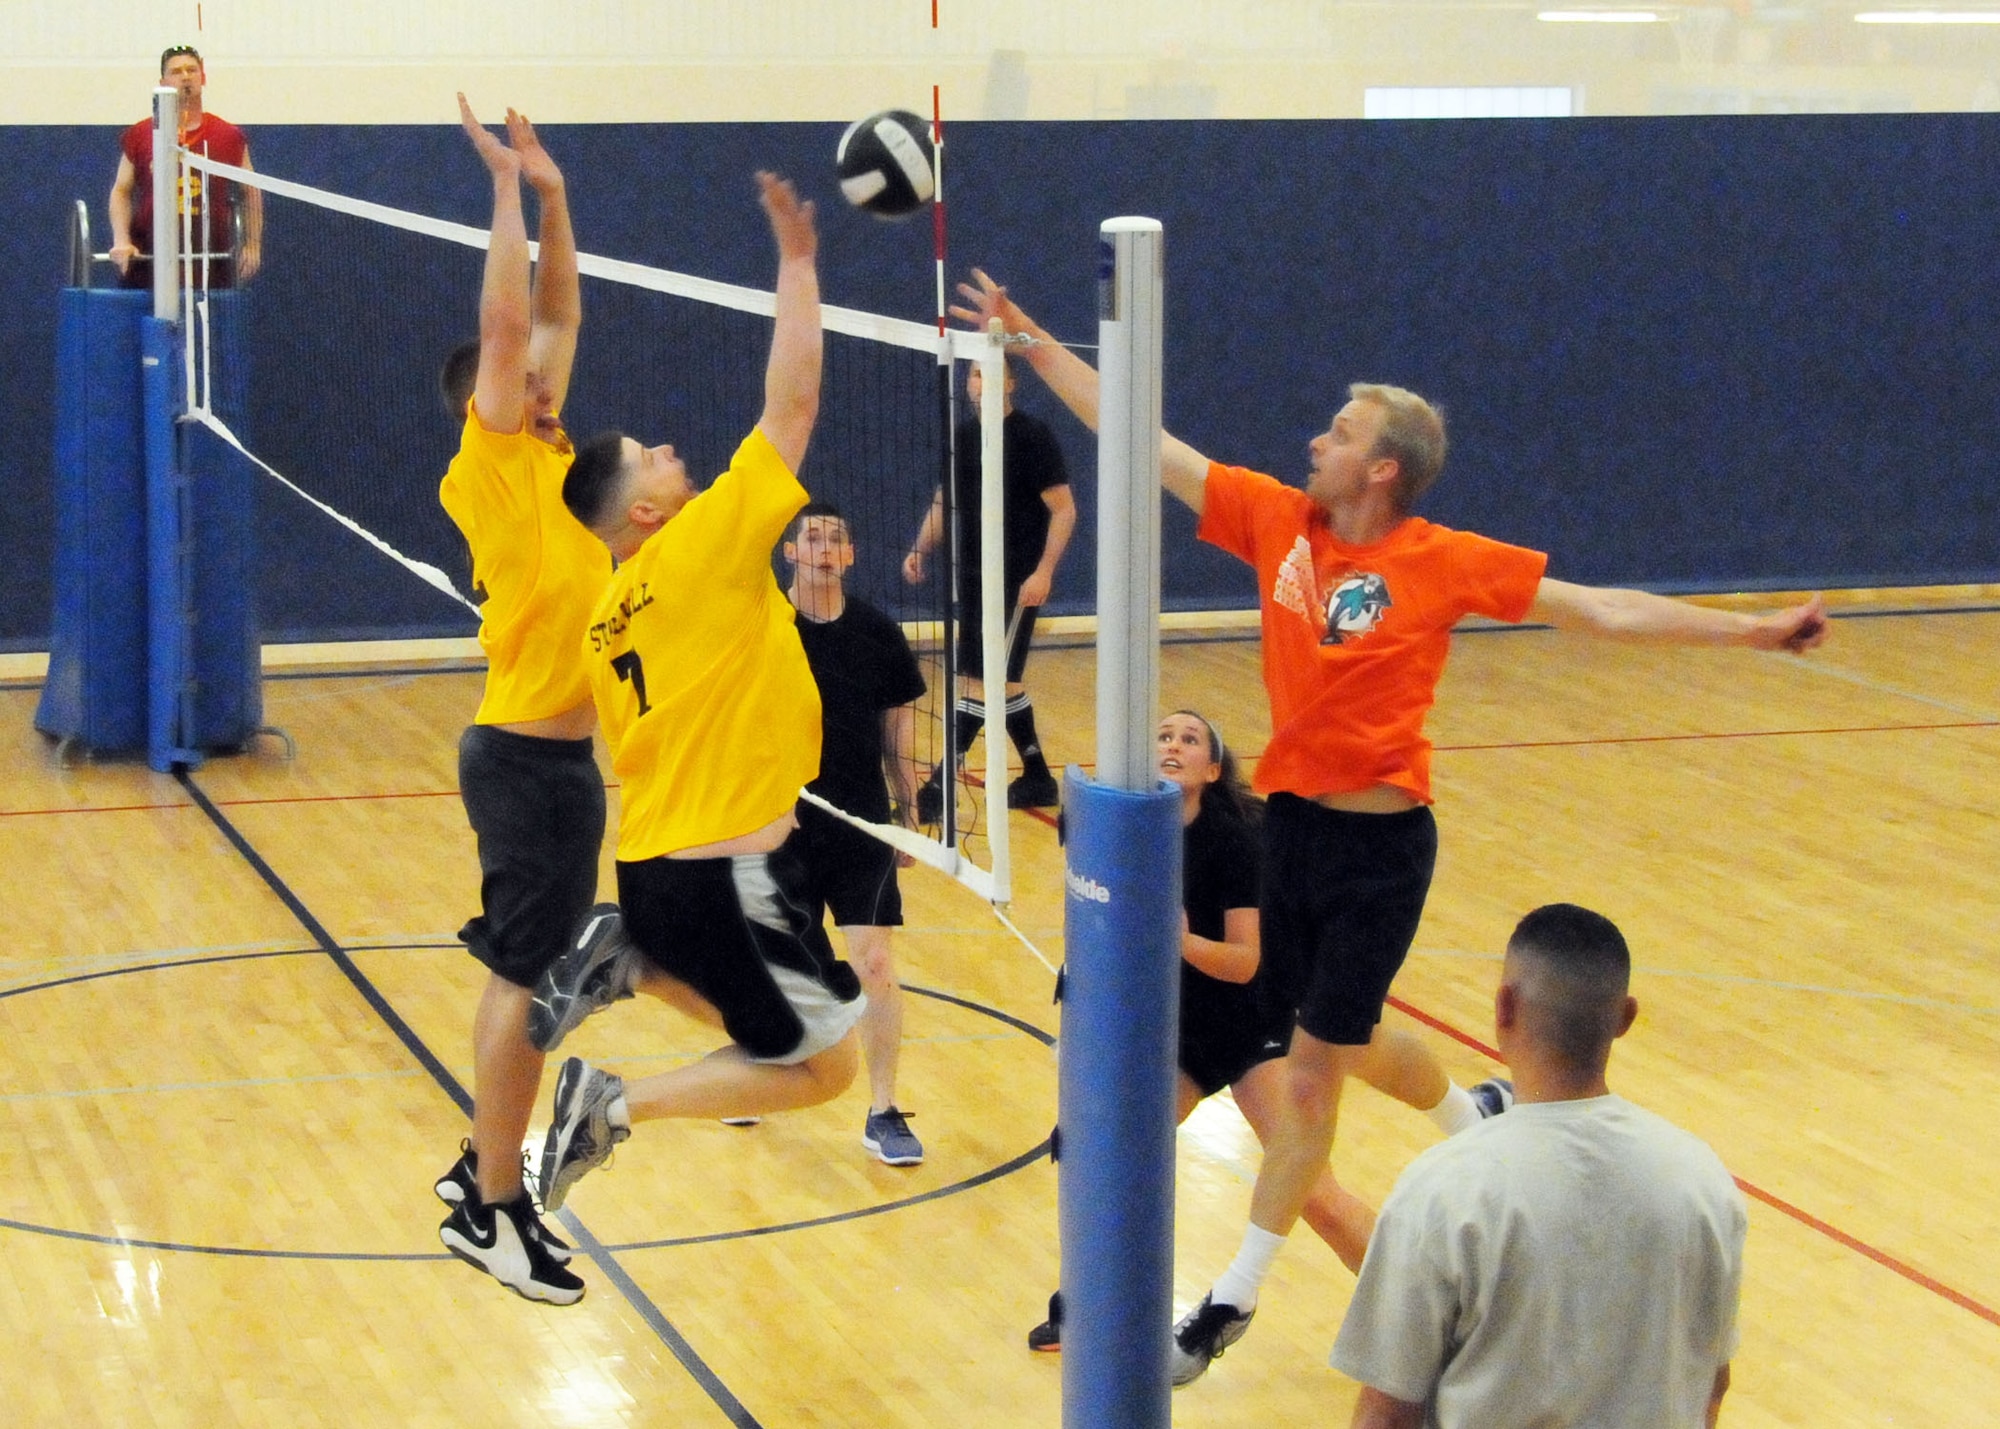 Staff Sgt. Olin McCrumb and Tech. Sgt. Stoney Jarvis jump to block a ball during the final Montana Air National Guard Vigilantes volleyball game played during the season playoffs held at the Malmstrom Fitness Center on May 14, 2013.  (U.S. Air Force photo/Senior Master Sgt. Eric Peterson)